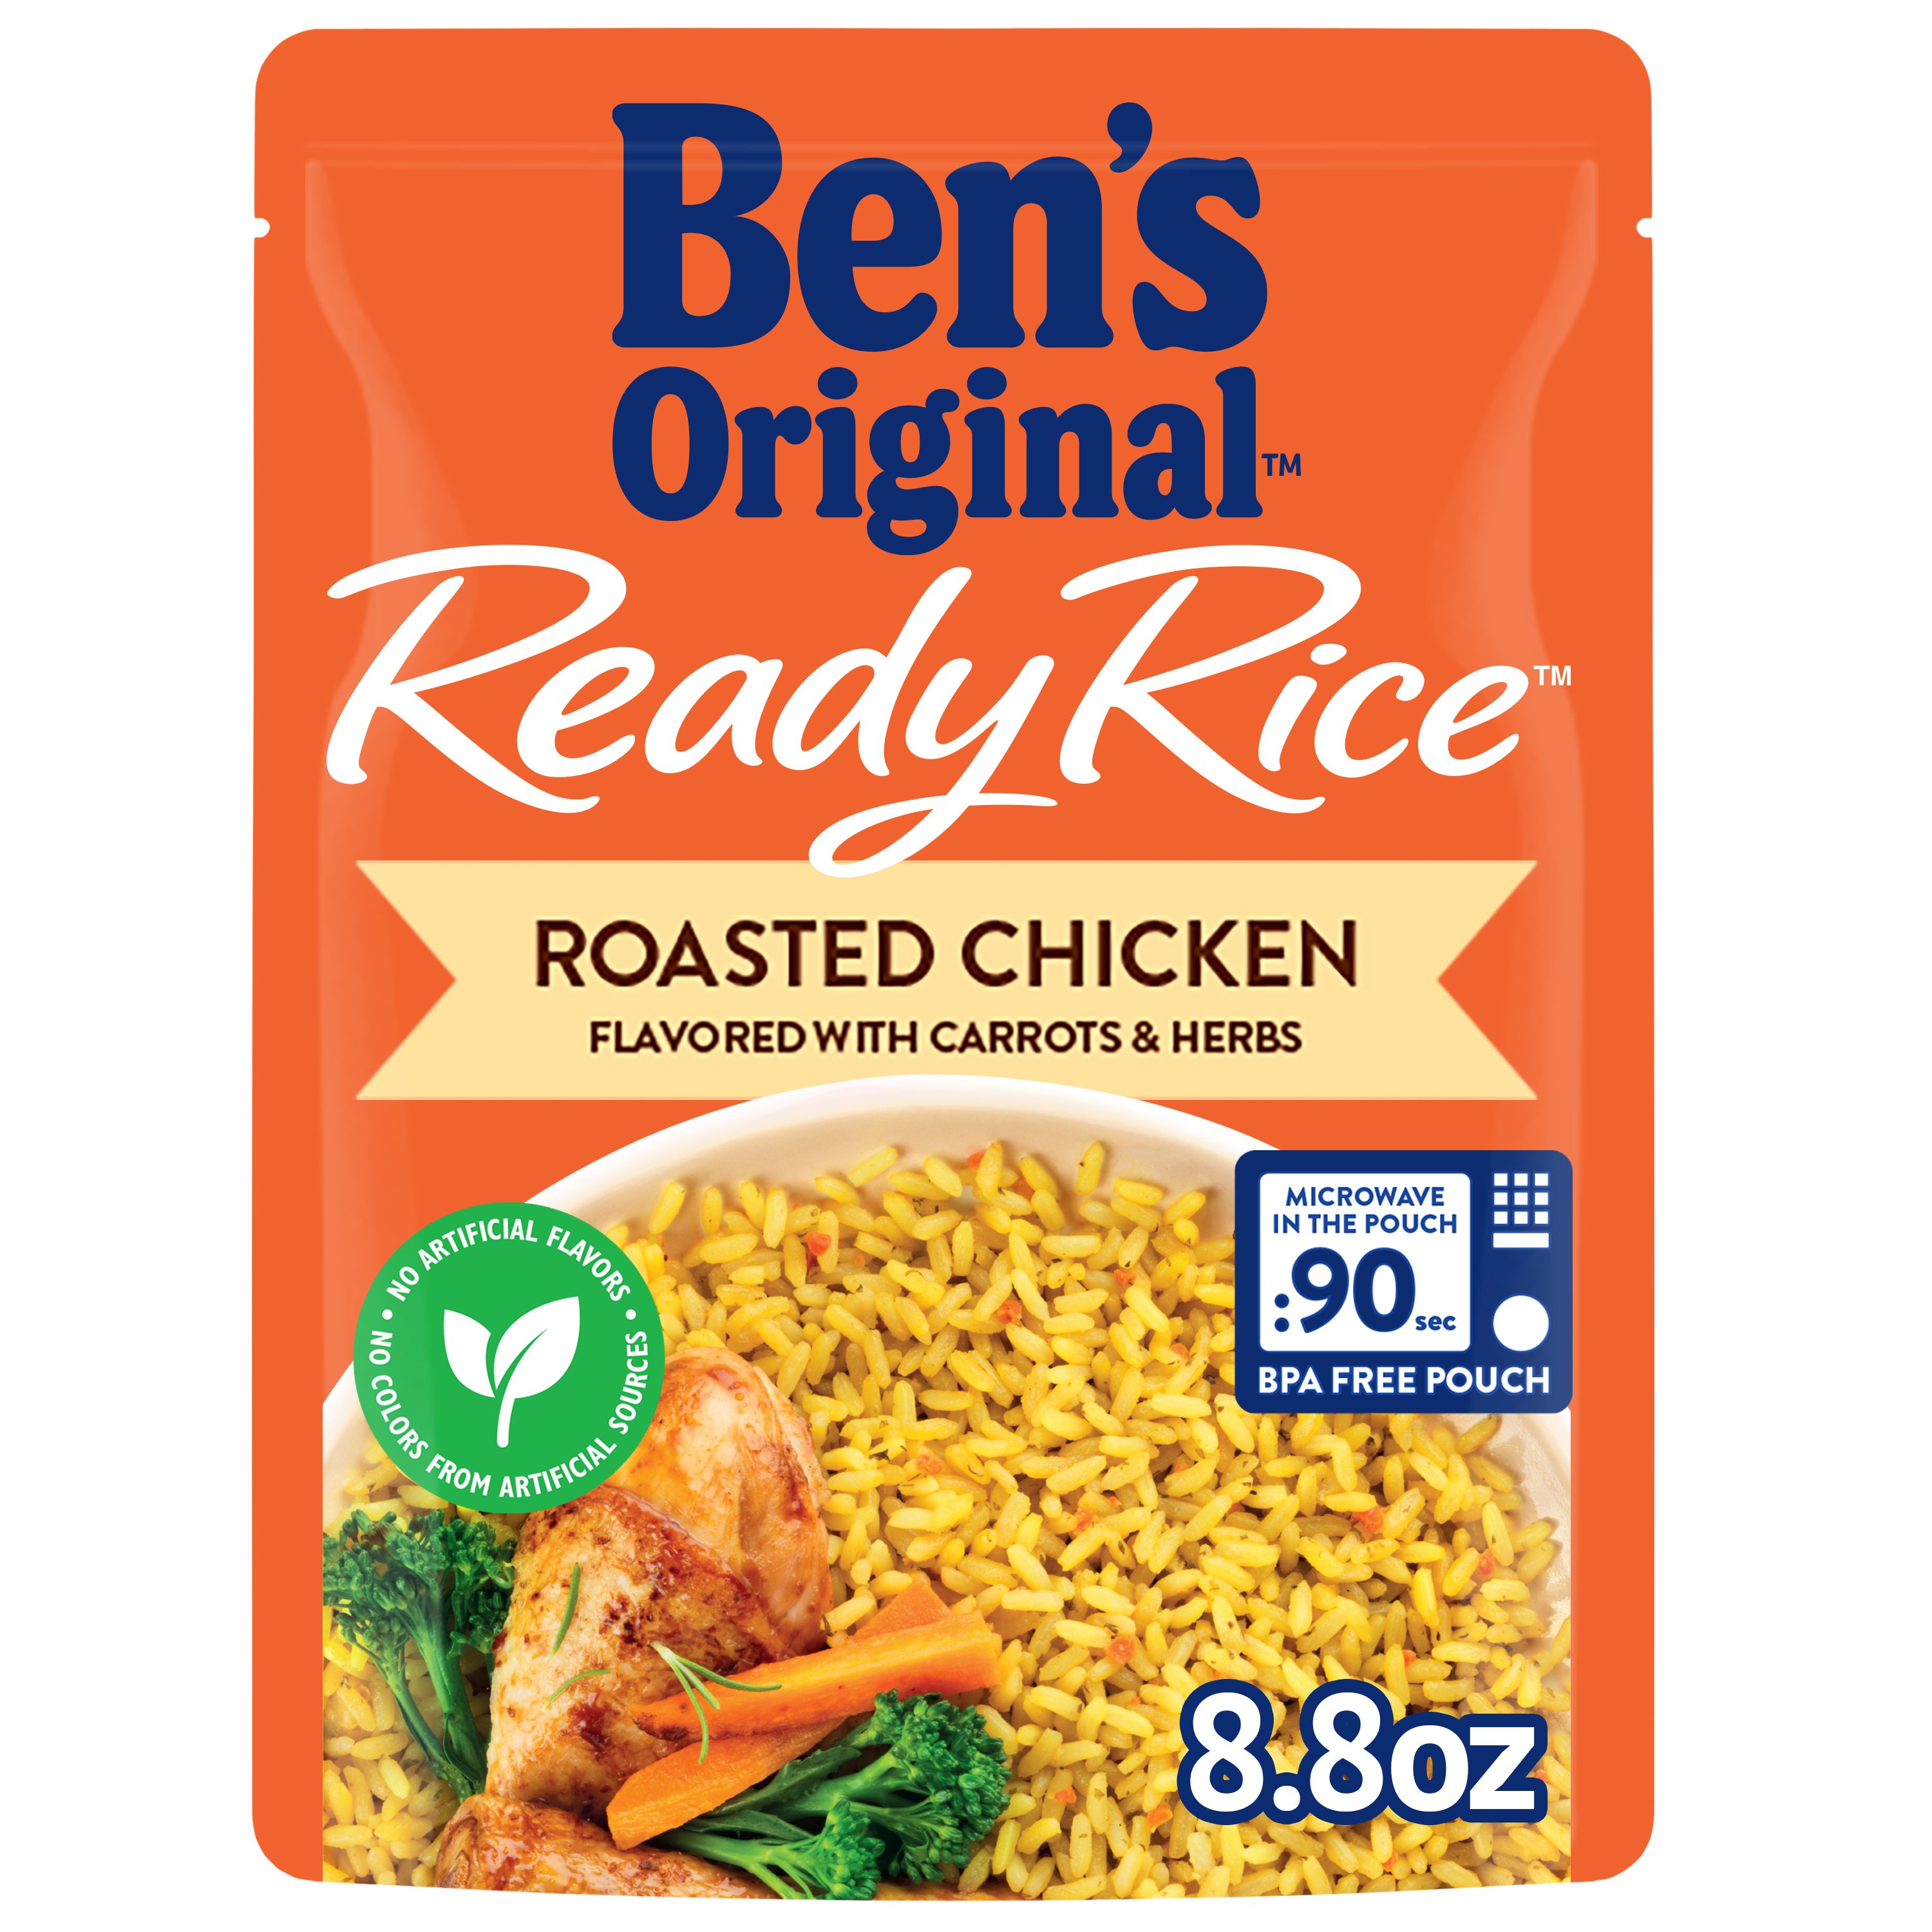 Ben's Original Ready Rice Roasted Chicken Flavored Rice